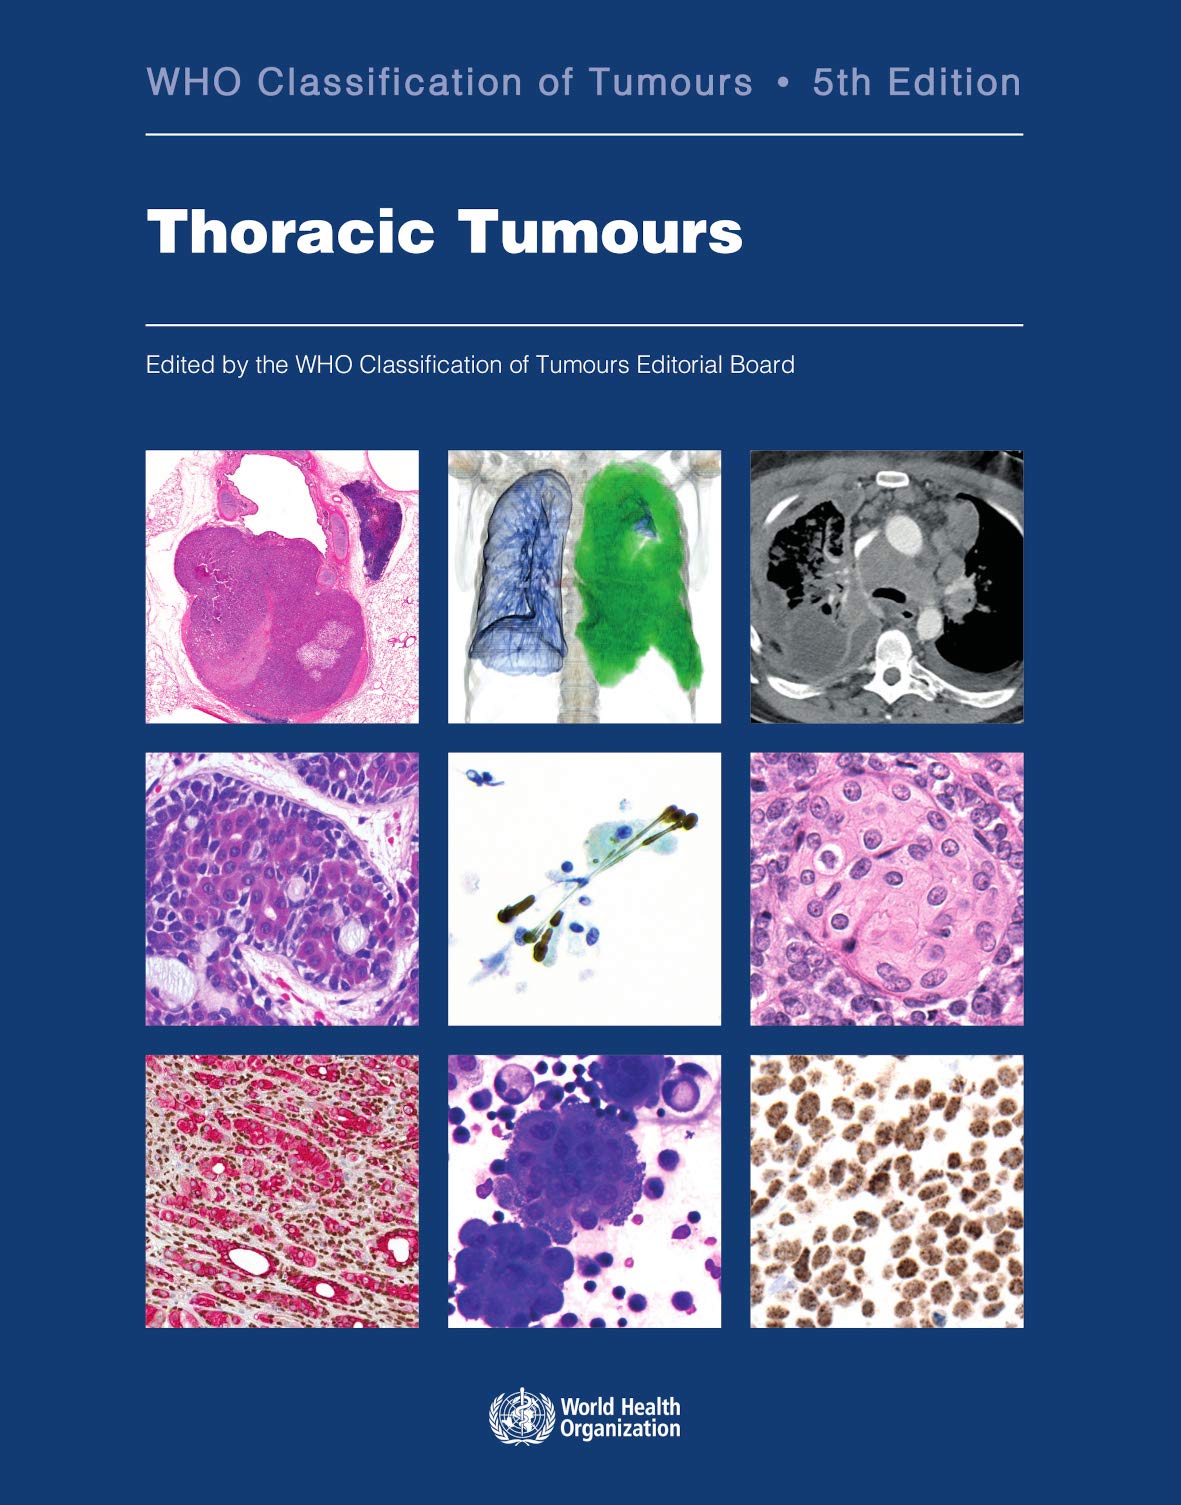 who-classification-of-tumours-5th-edition-volume-5-thoracic-tumours